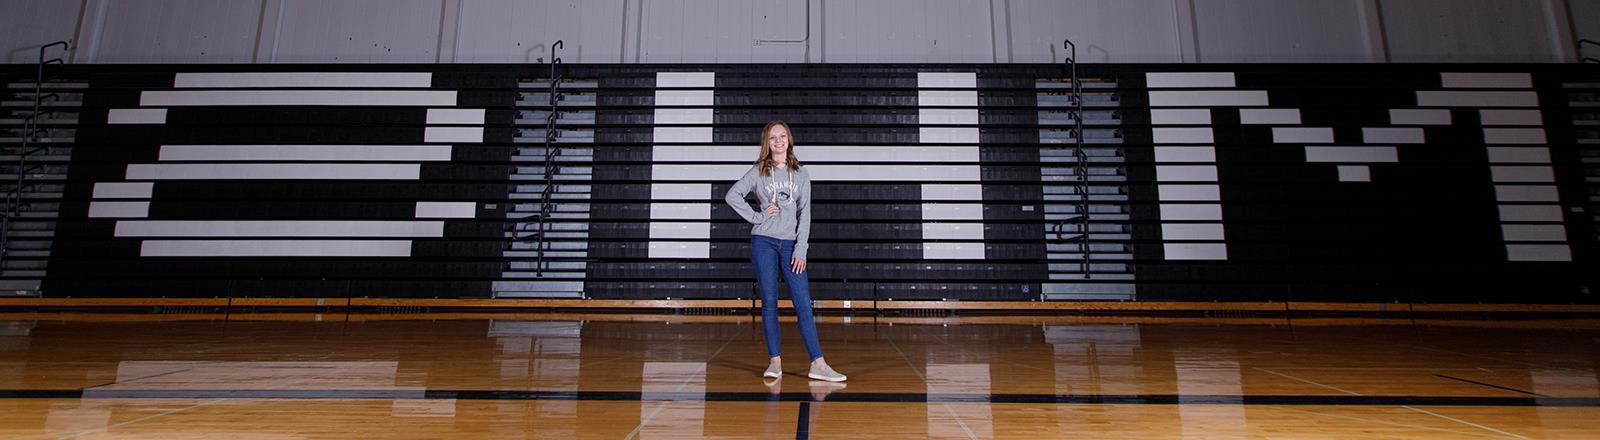 Mandan High student has already earned a year’s worth of college credits - image